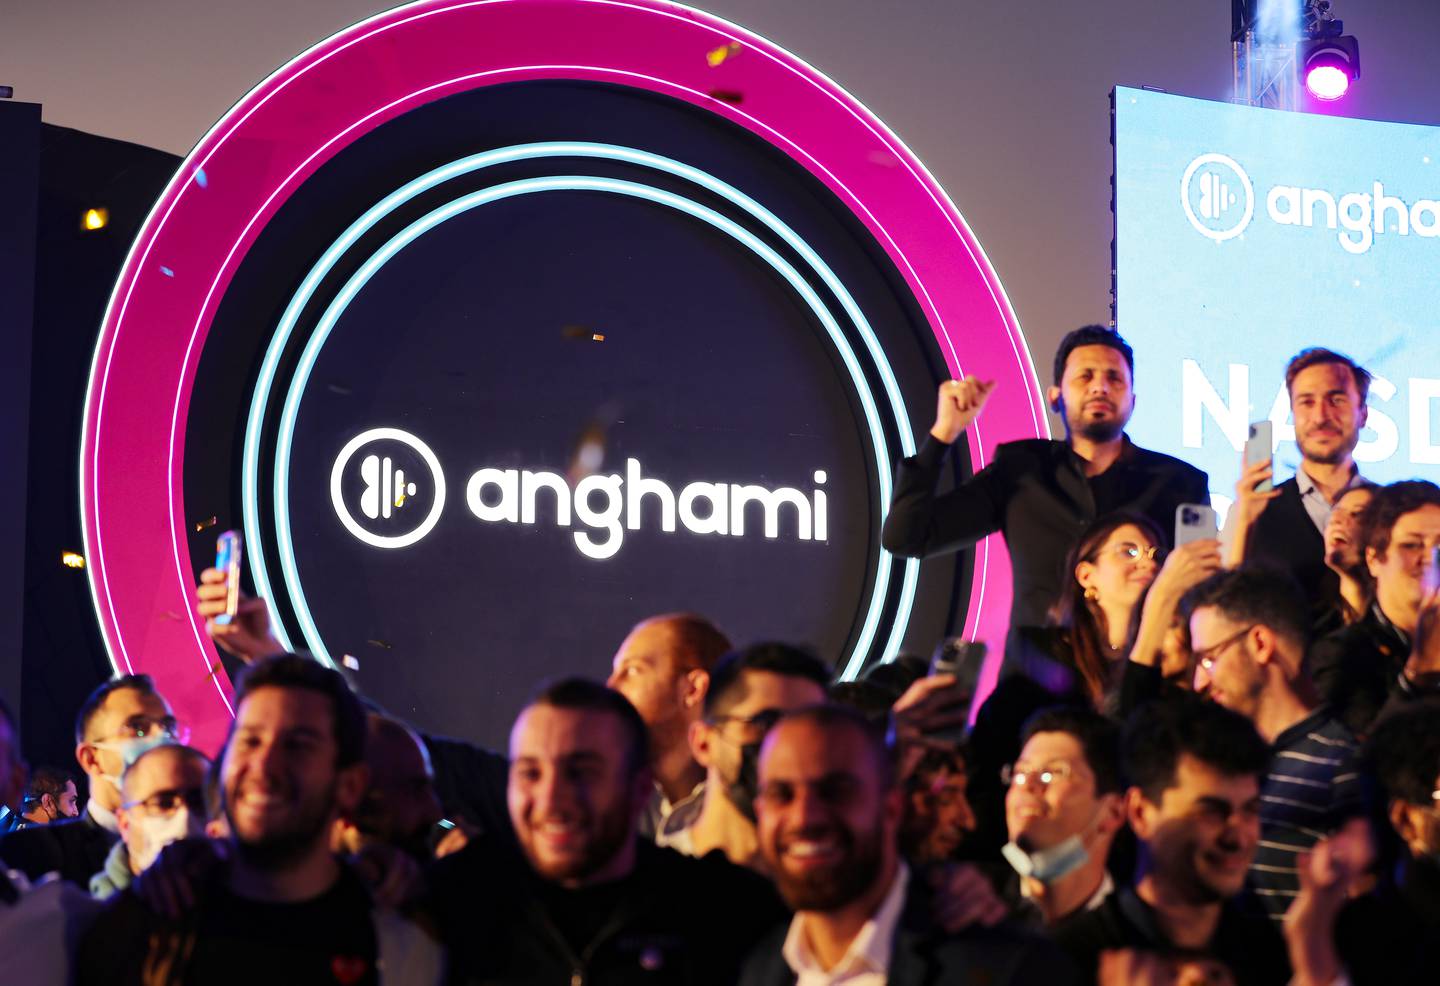 Anghami’s music streaming platform has more than 75 million users in Europe, the US and Mena region. Photo: Chris Whiteoak / The National